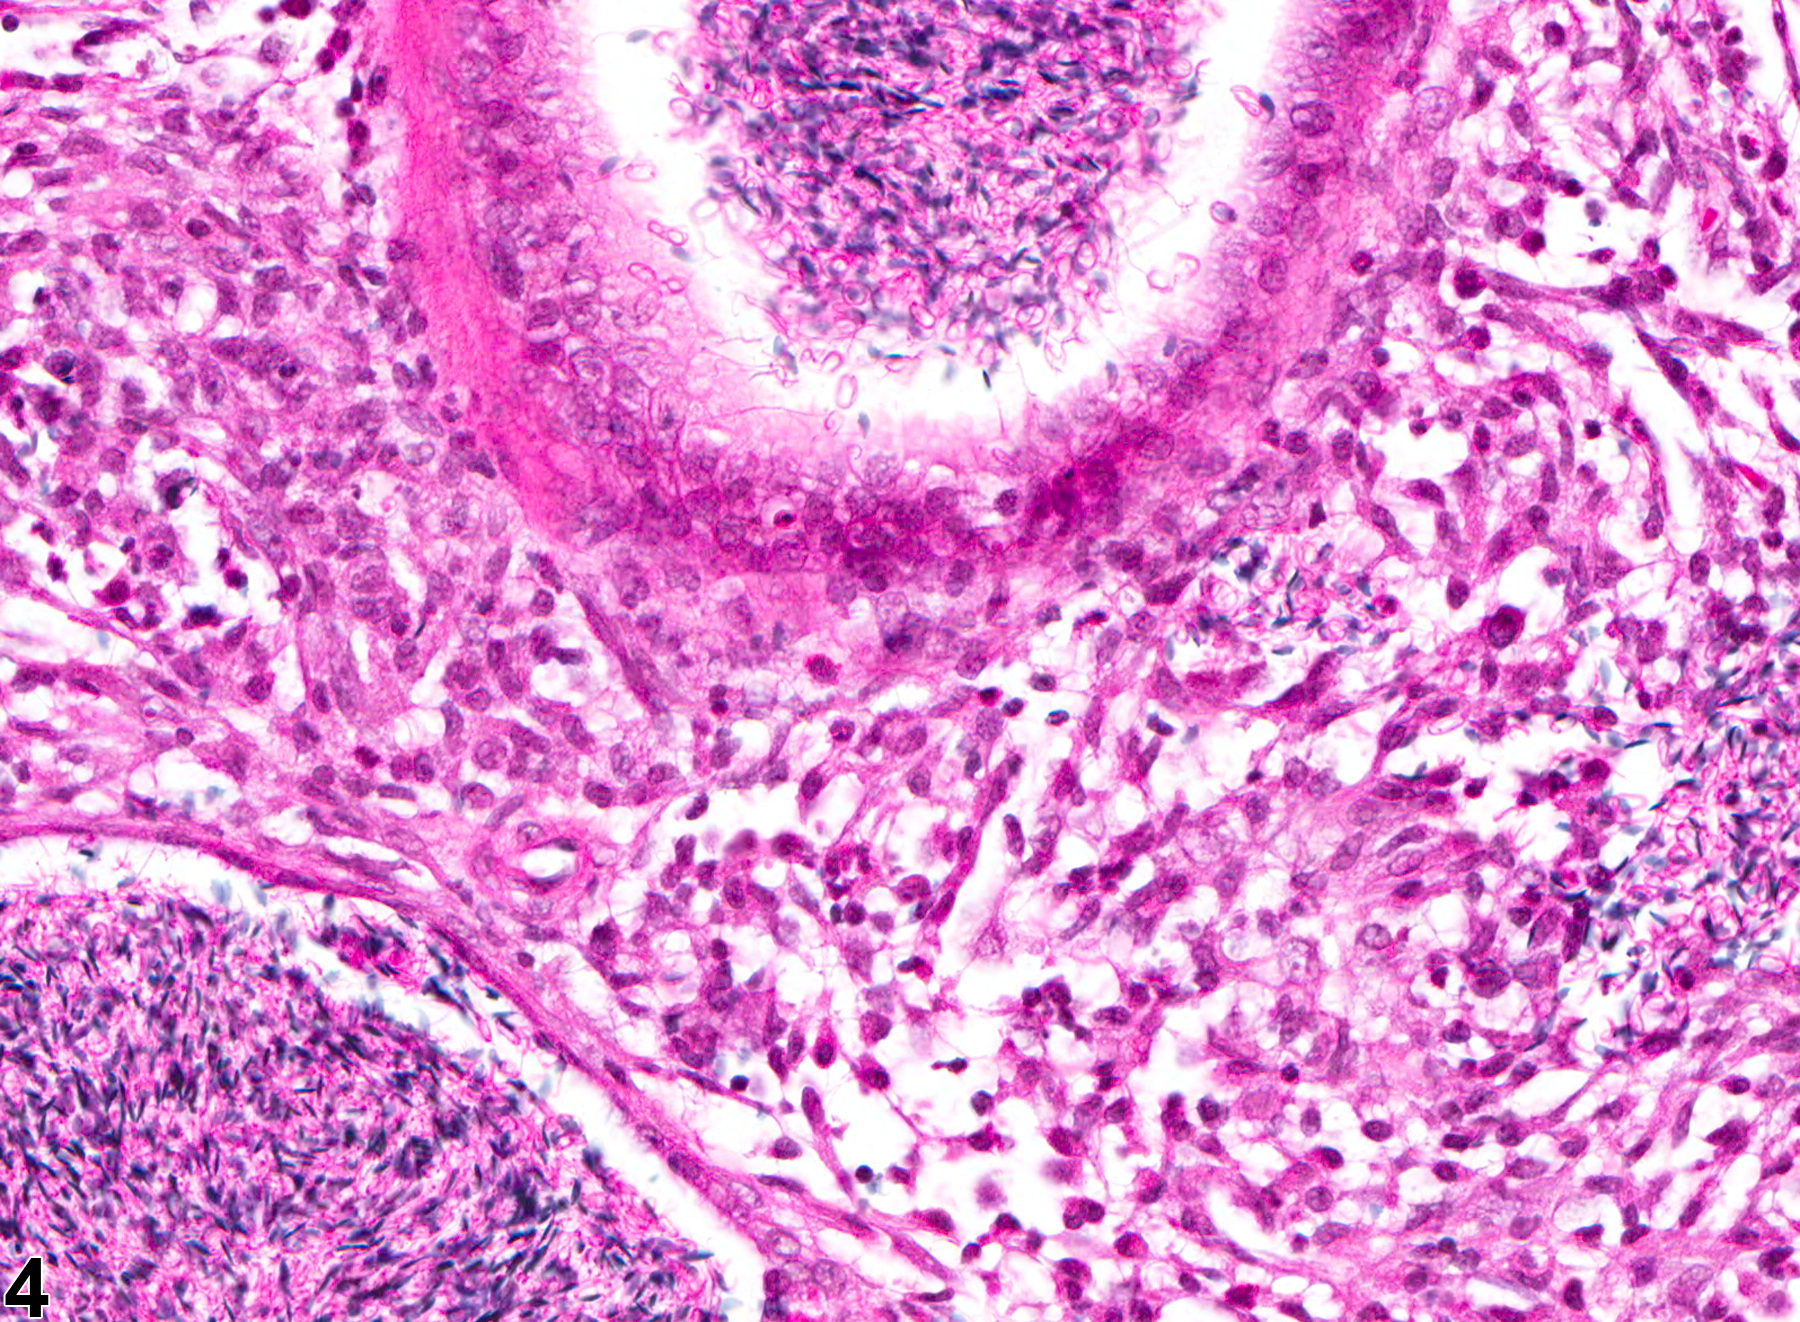 Image of inflammation in the epididymis from a male B6C3F1 mouse in a chronic study